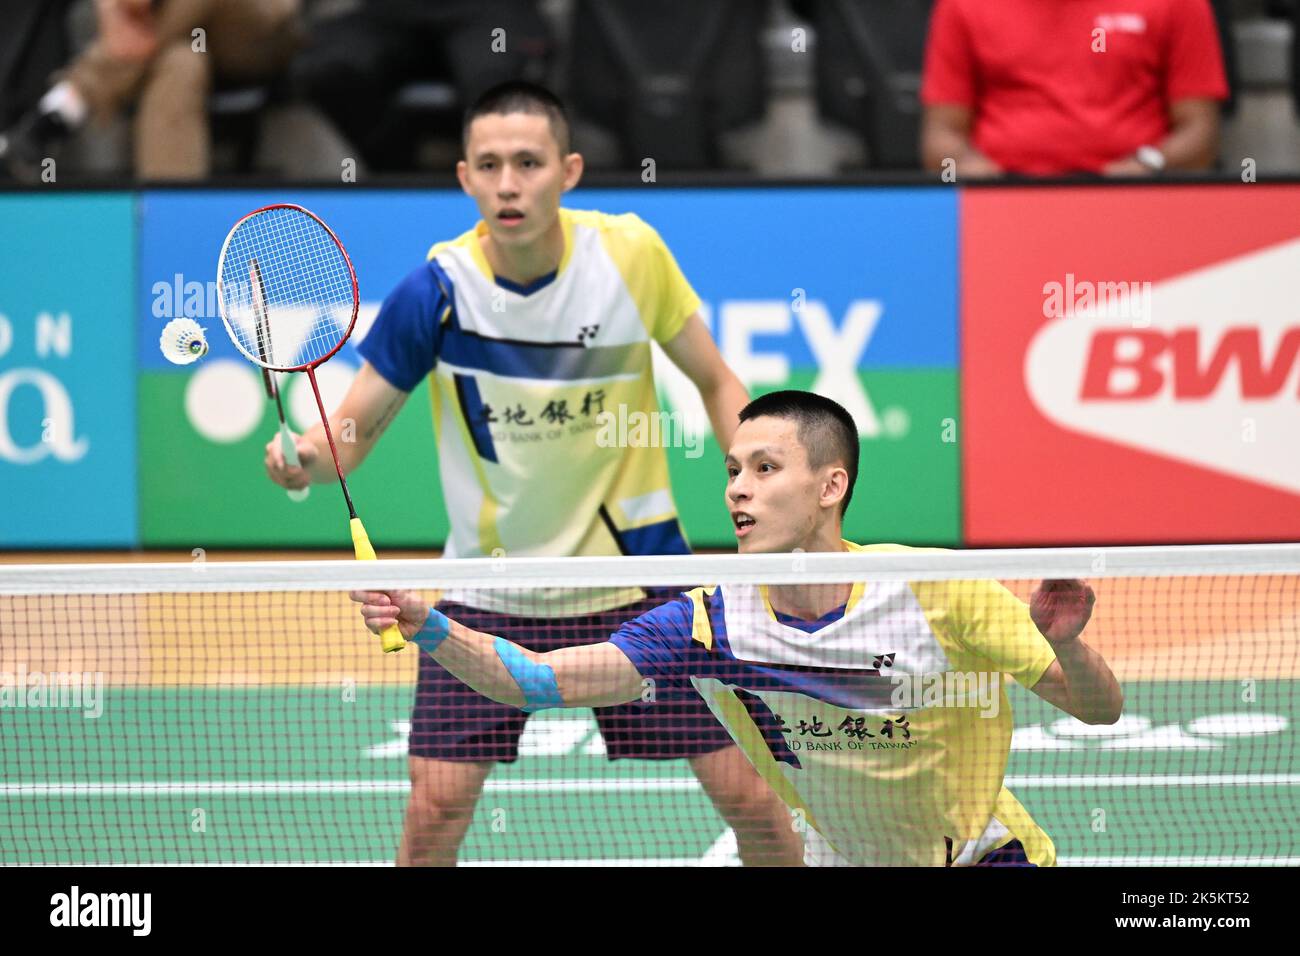 Sydney, Australia. 09th Oct, 2022. Lee Fang-Jen (L) and Lee Fang-Chih (R) of Chinese Taipei seen in action during the YONEX Sydney International 2022 Men's Double finals match against Nyl Yakura and adam xingyu dong (Canada). Lee Fang-Jen and Lee Fang-Chih won the match 21-12, 16-21, 21-16. Credit: SOPA Images Limited/Alamy Live News Stock Photo